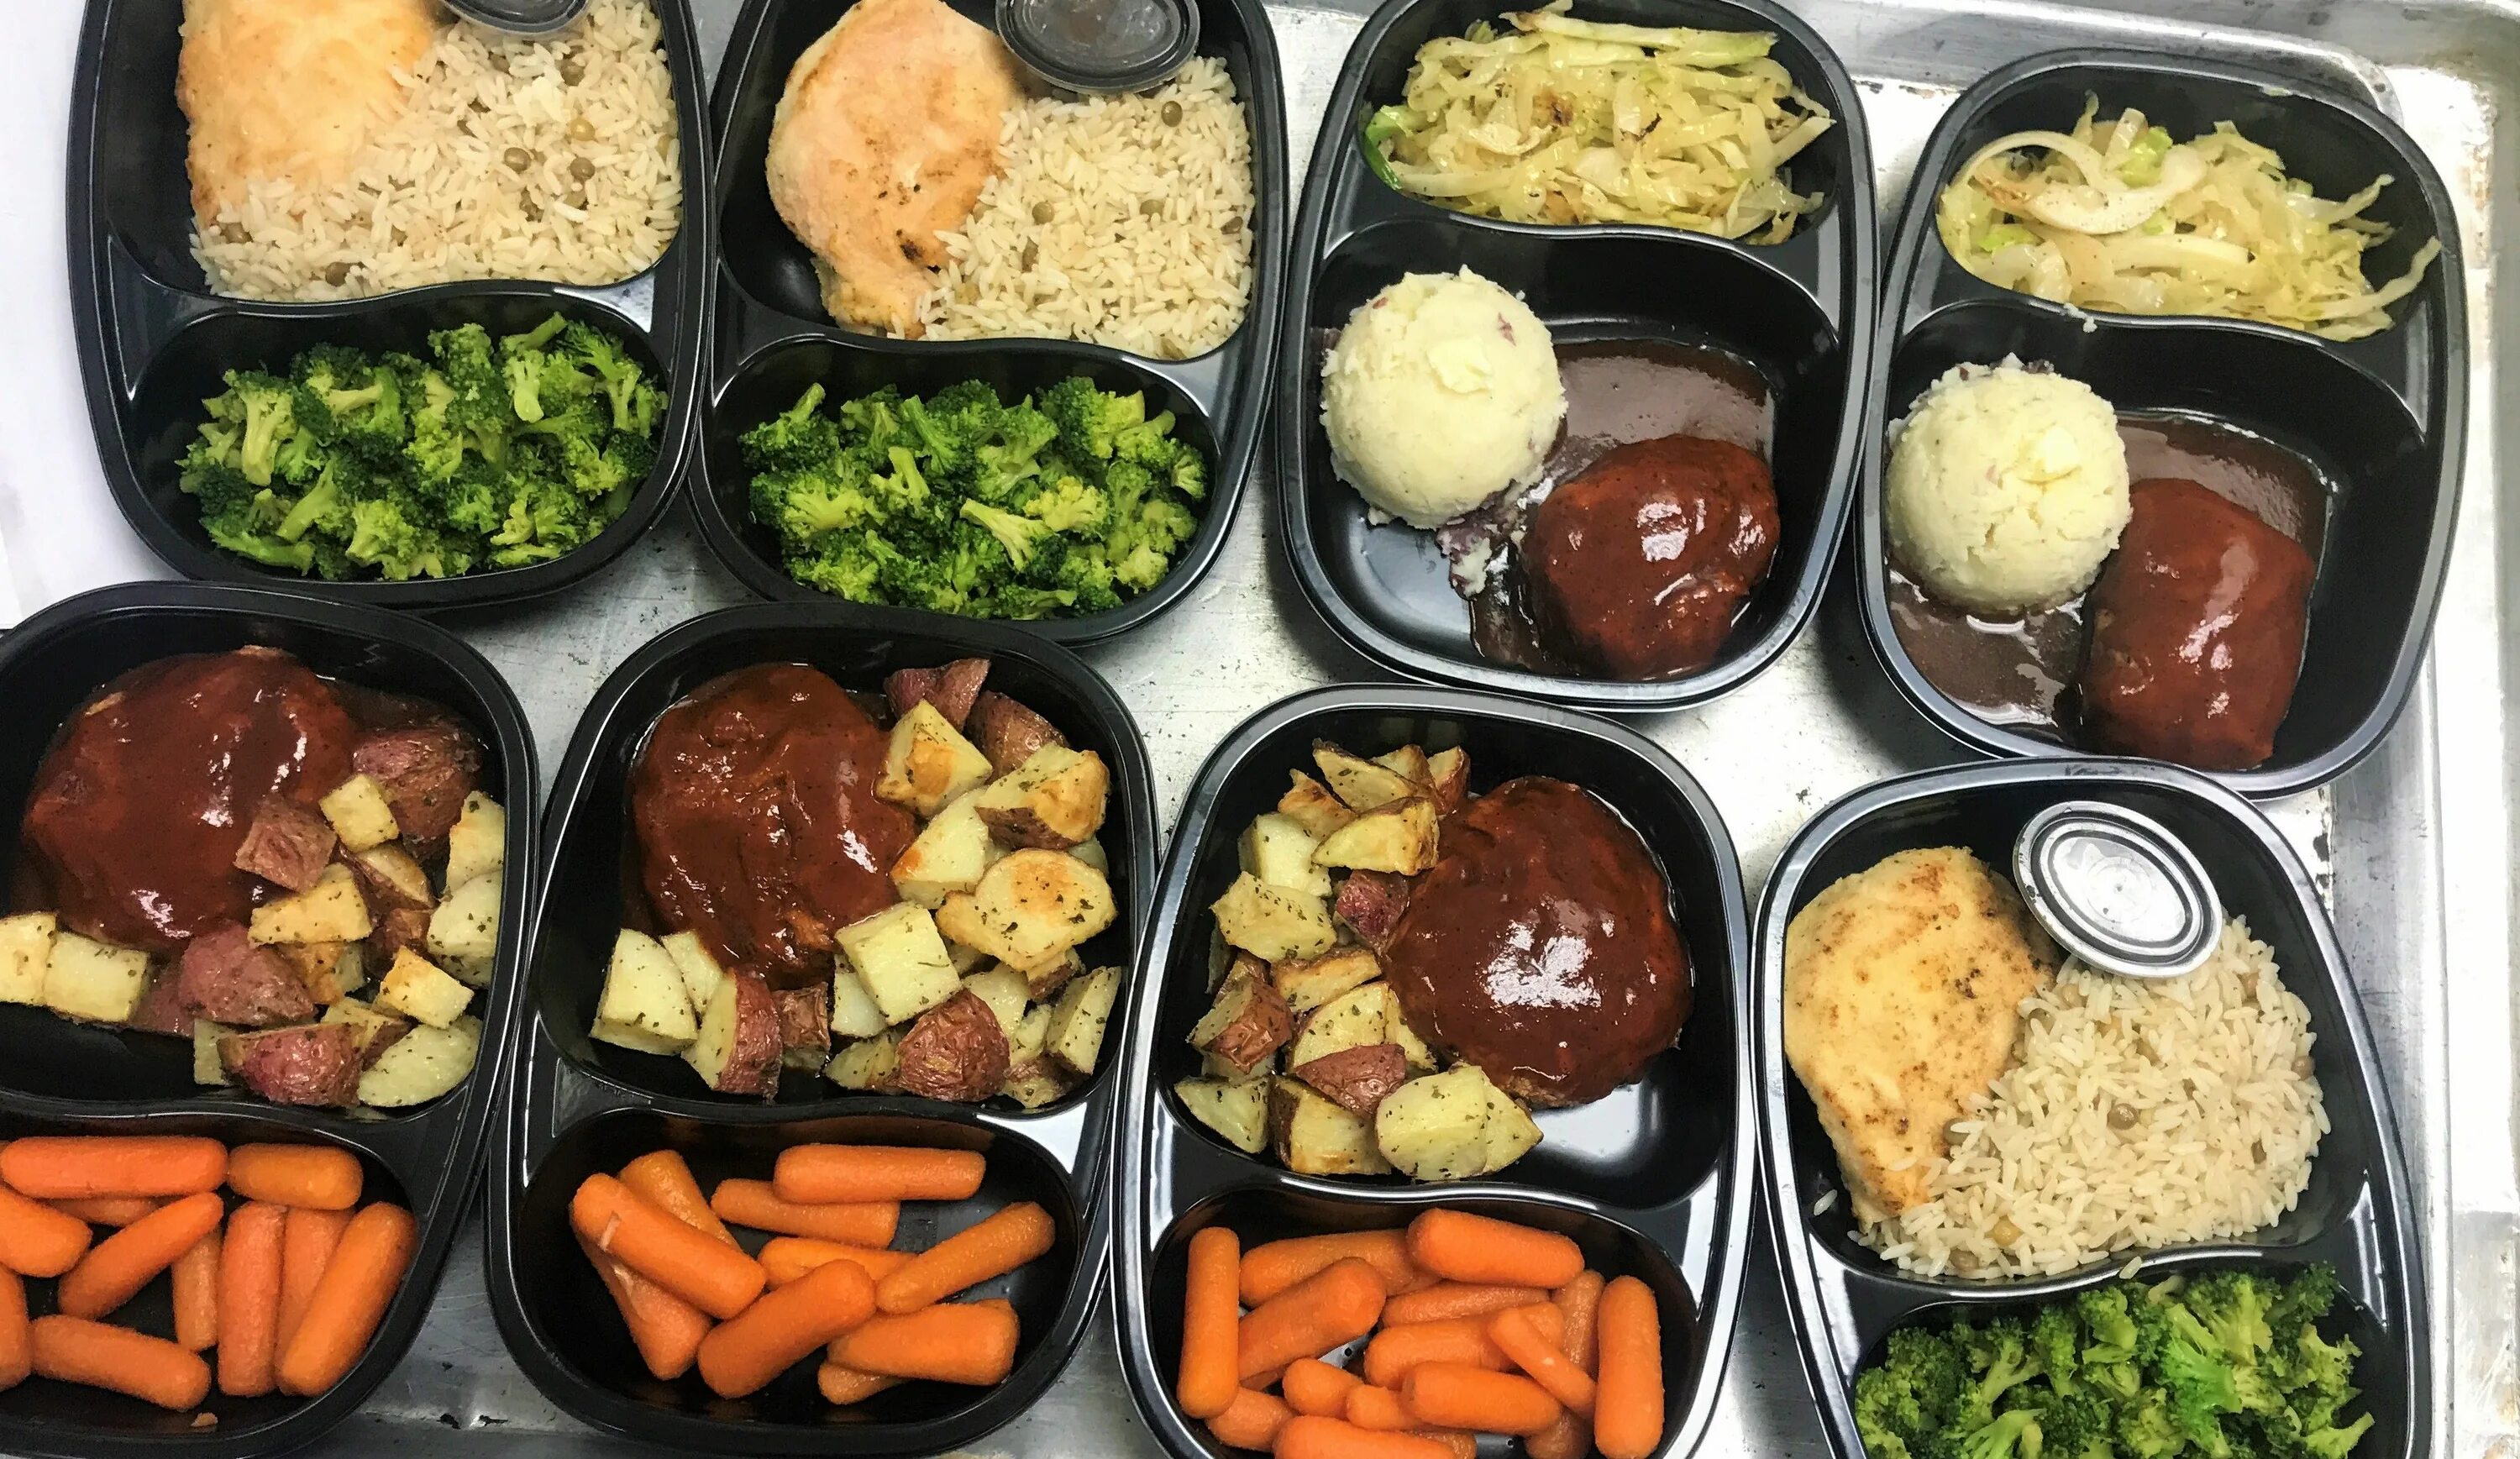 Prepared meals. Prepared food. Pre-prepared food. Ready-cooked meals. Prepare meals